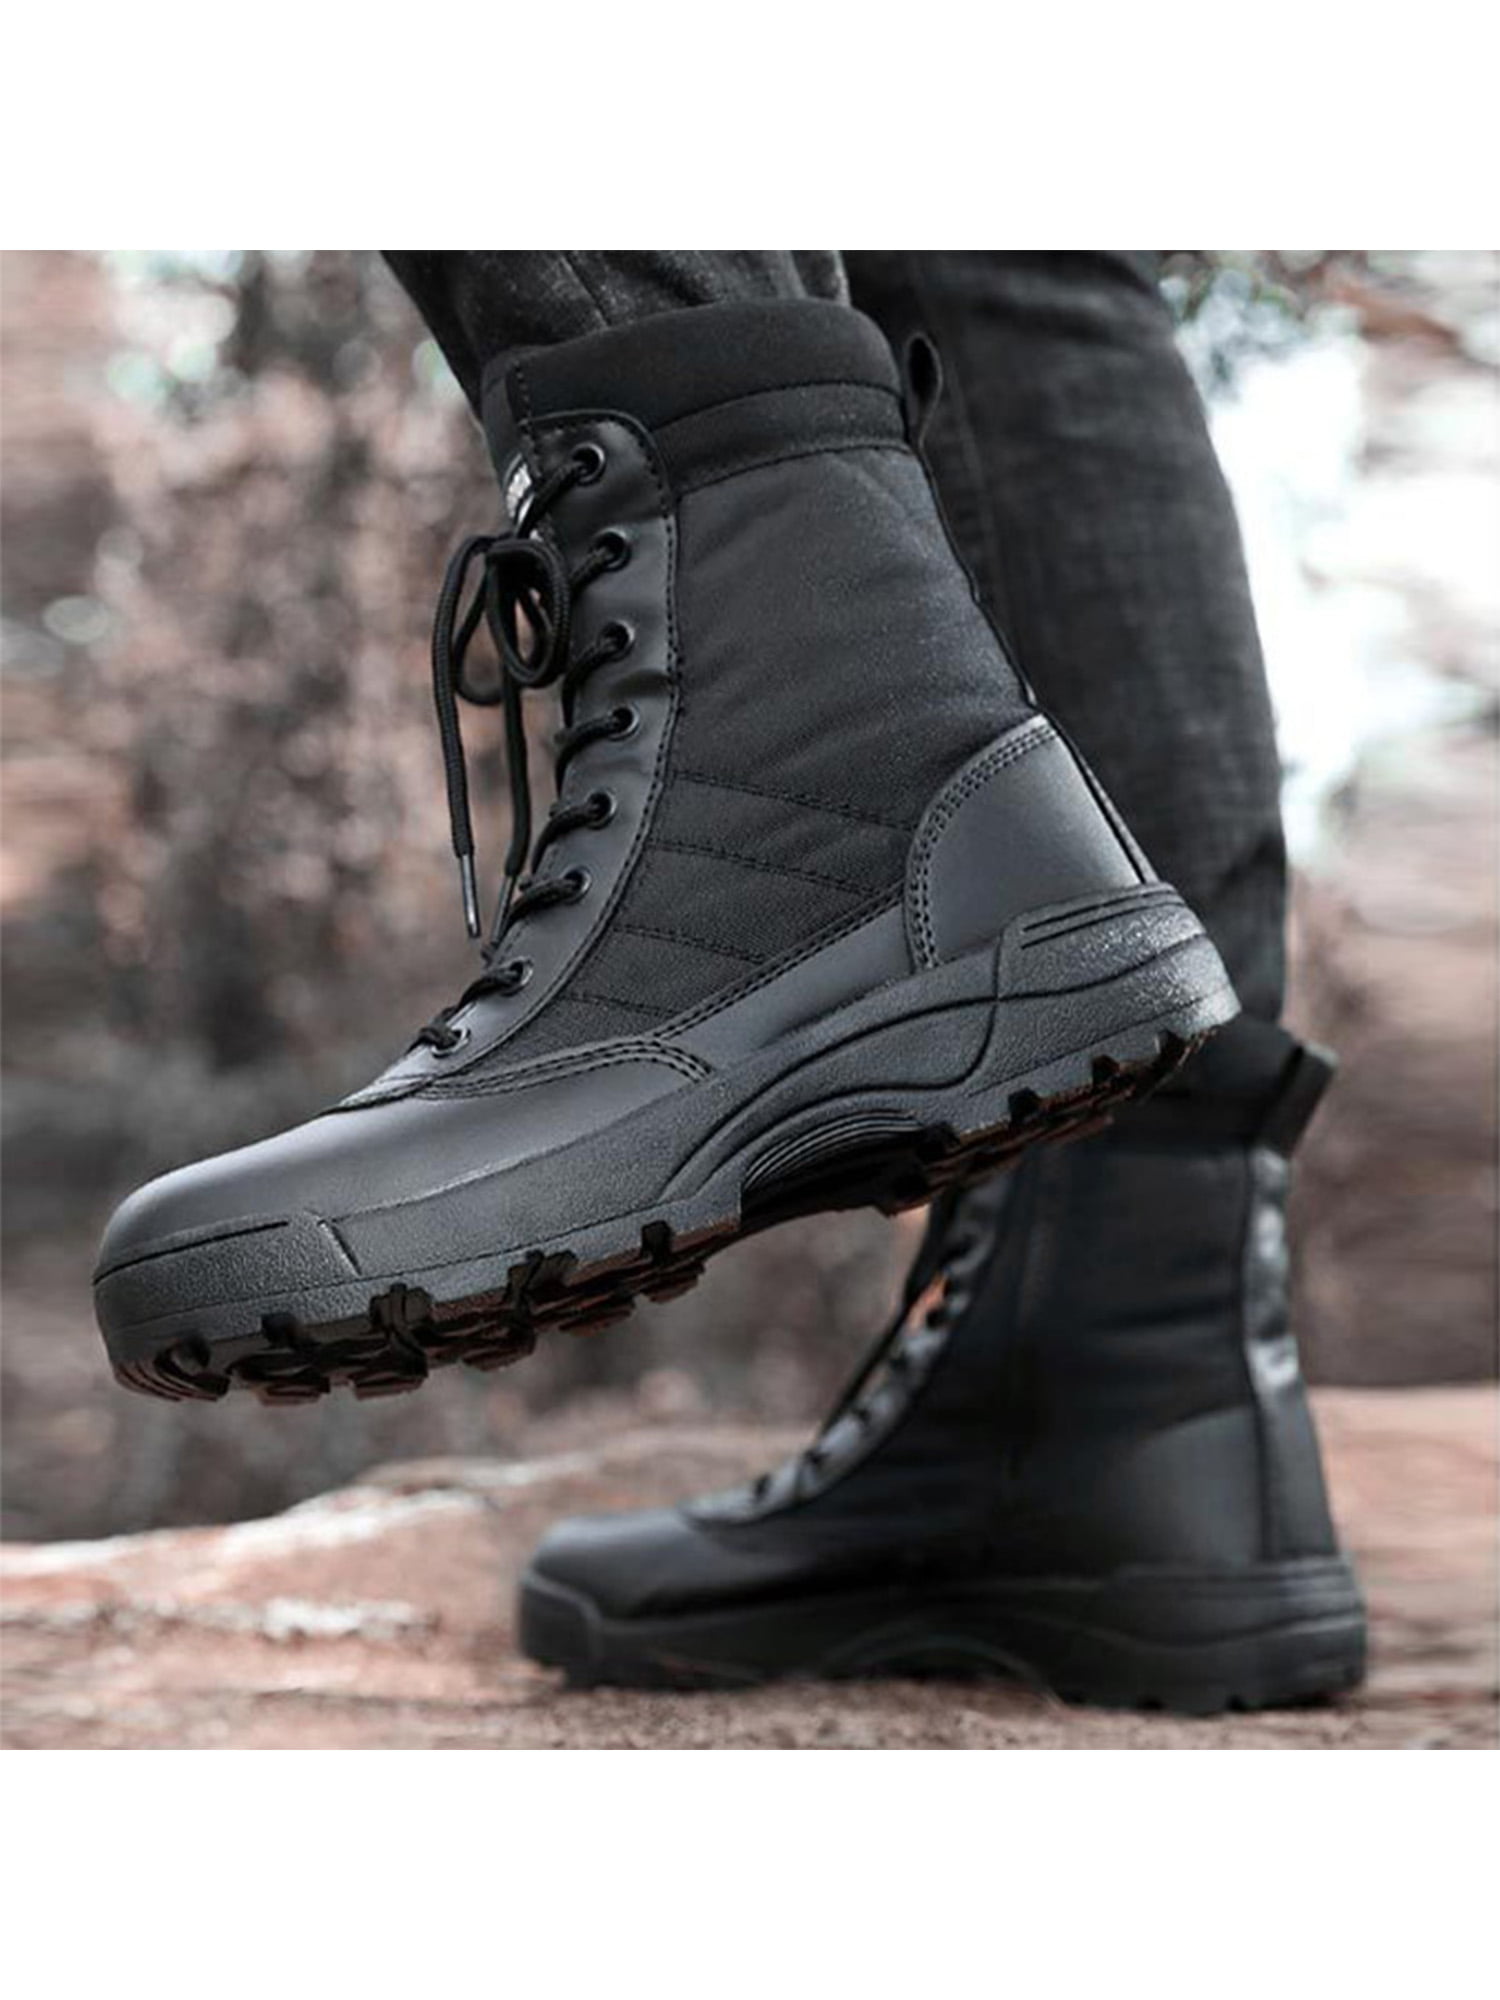 Mens High Top Military Tactical Boots Desert Army Hiking Combat Ankle Boots New 